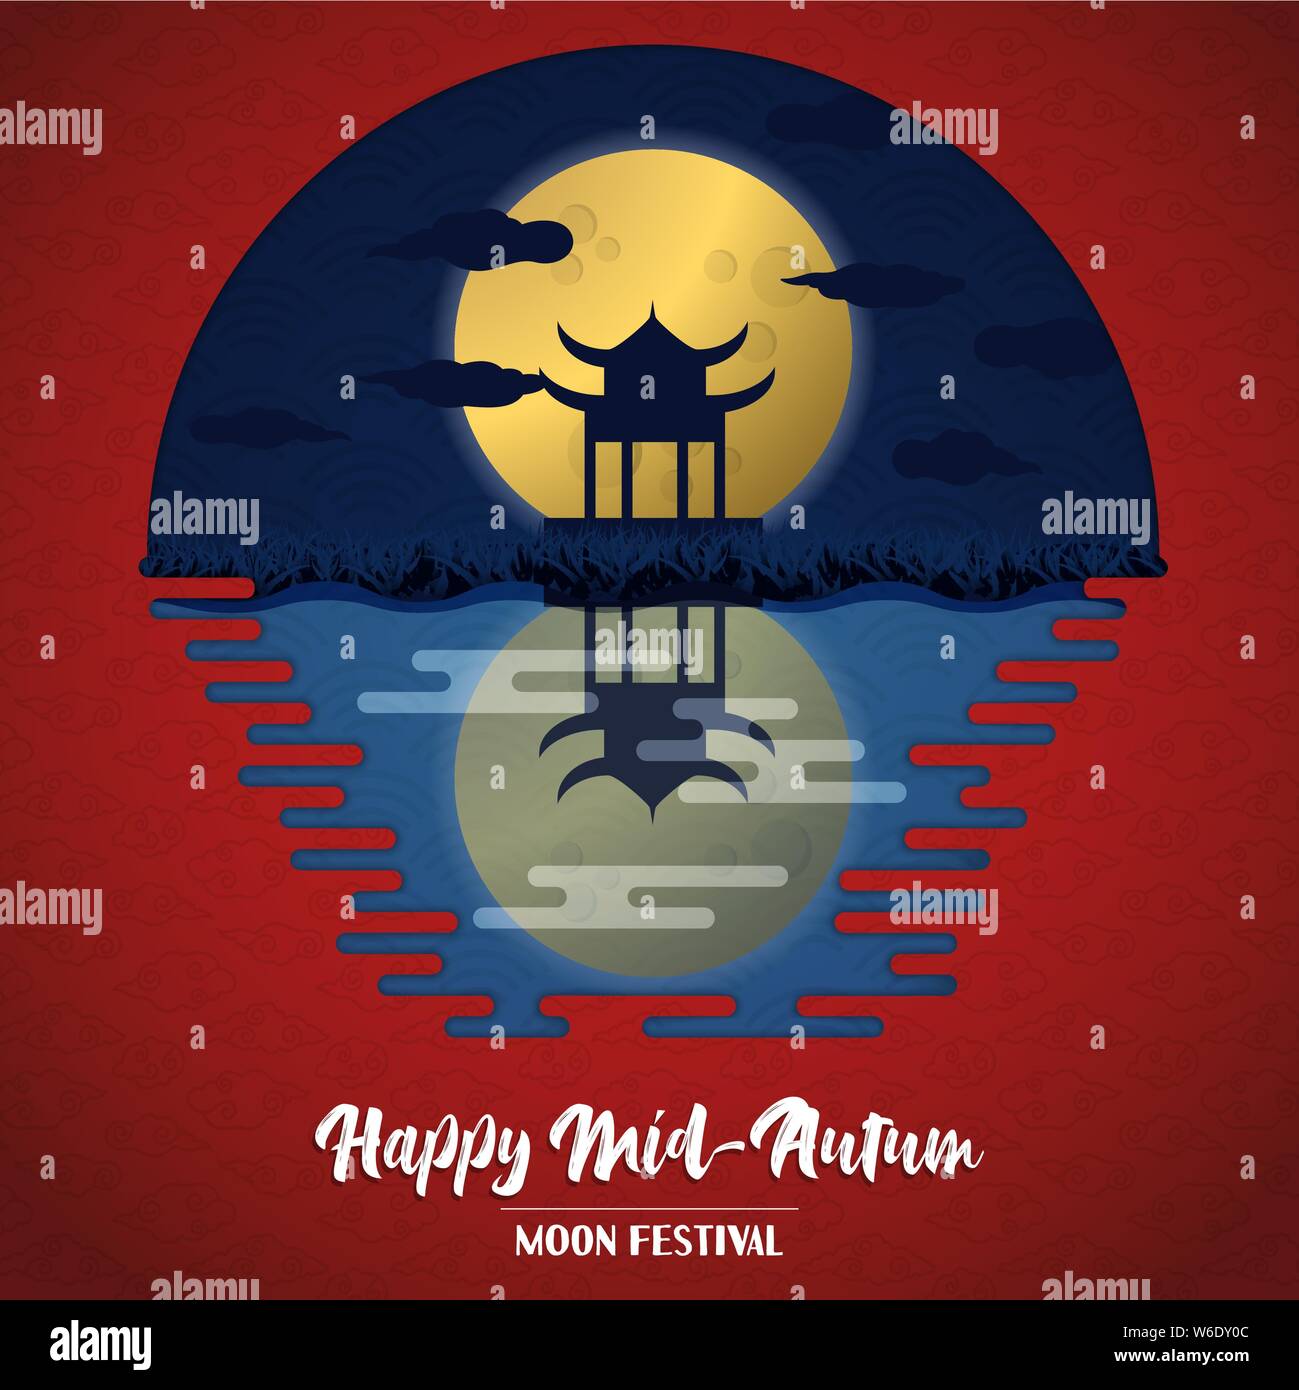 Happy mid autumn festival illustration of traditional asian landscape under full moon. Chinese celebration design with red cloud background. Stock Vector